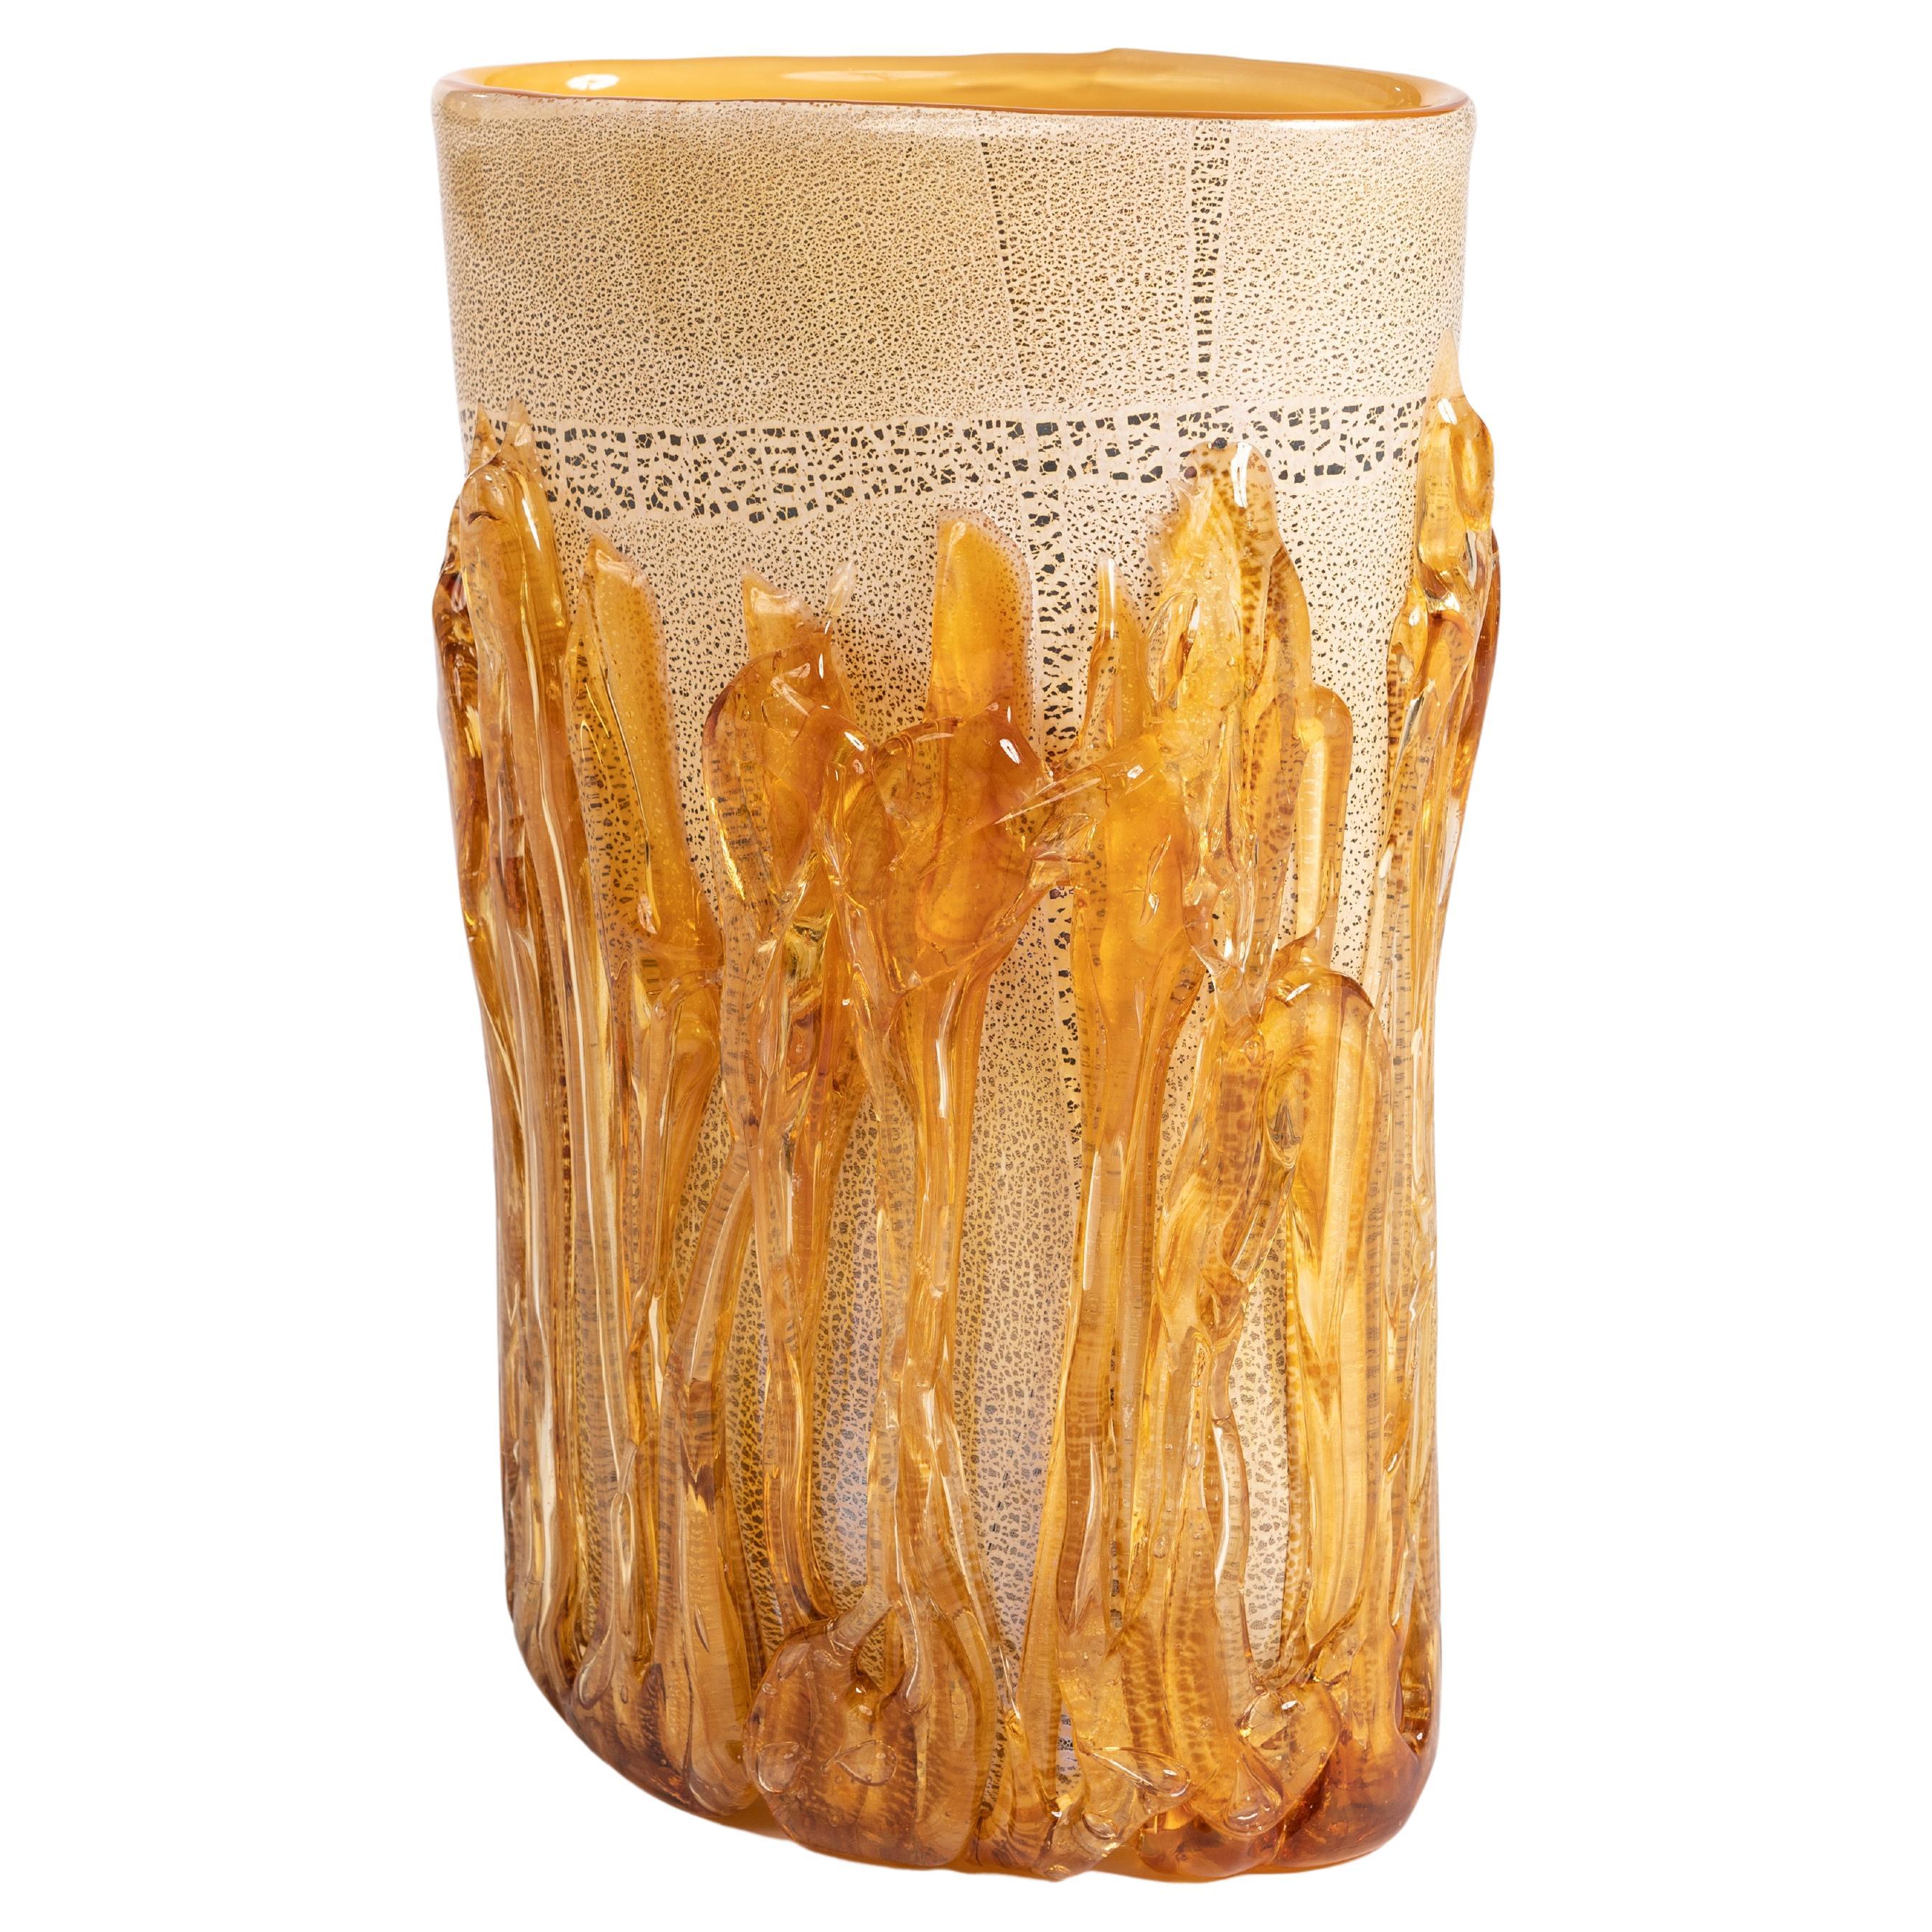 Modern Murano Glass Vase in Gold-Amber Color signed by Hand, Italy 2015 For Sale